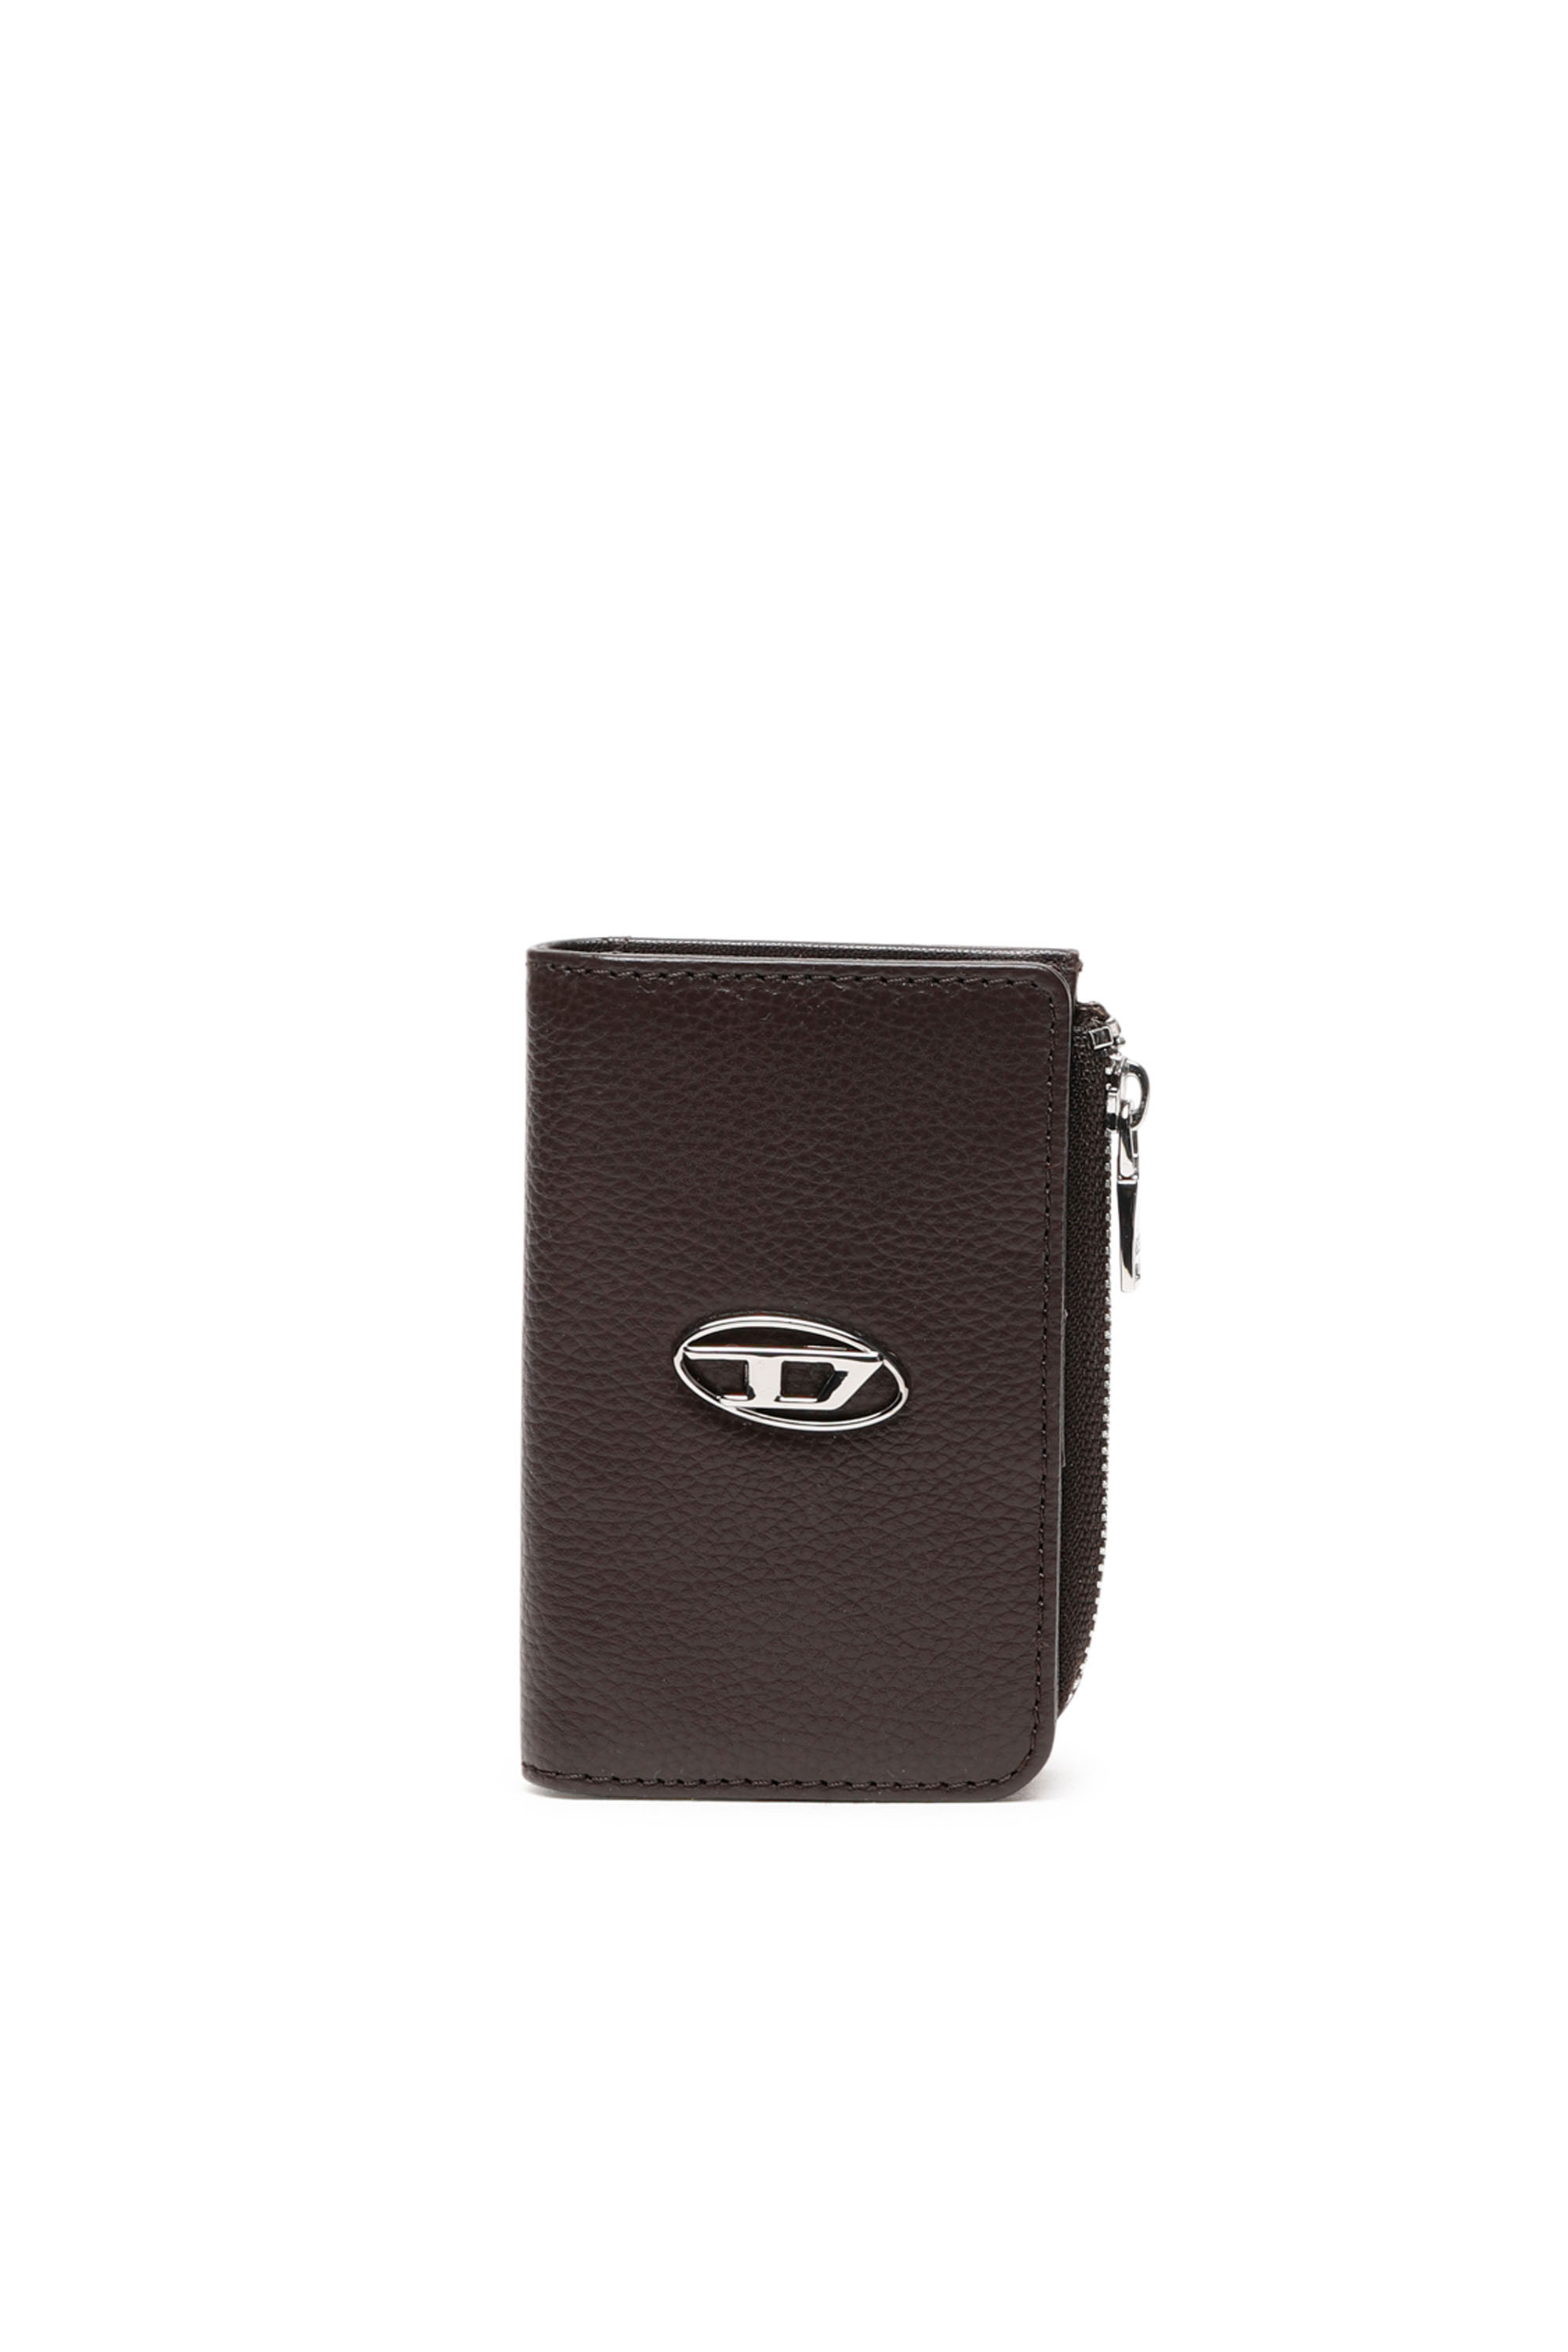 Diesel - Key case in grained leather - Bijoux and Gadgets - Man - Brown